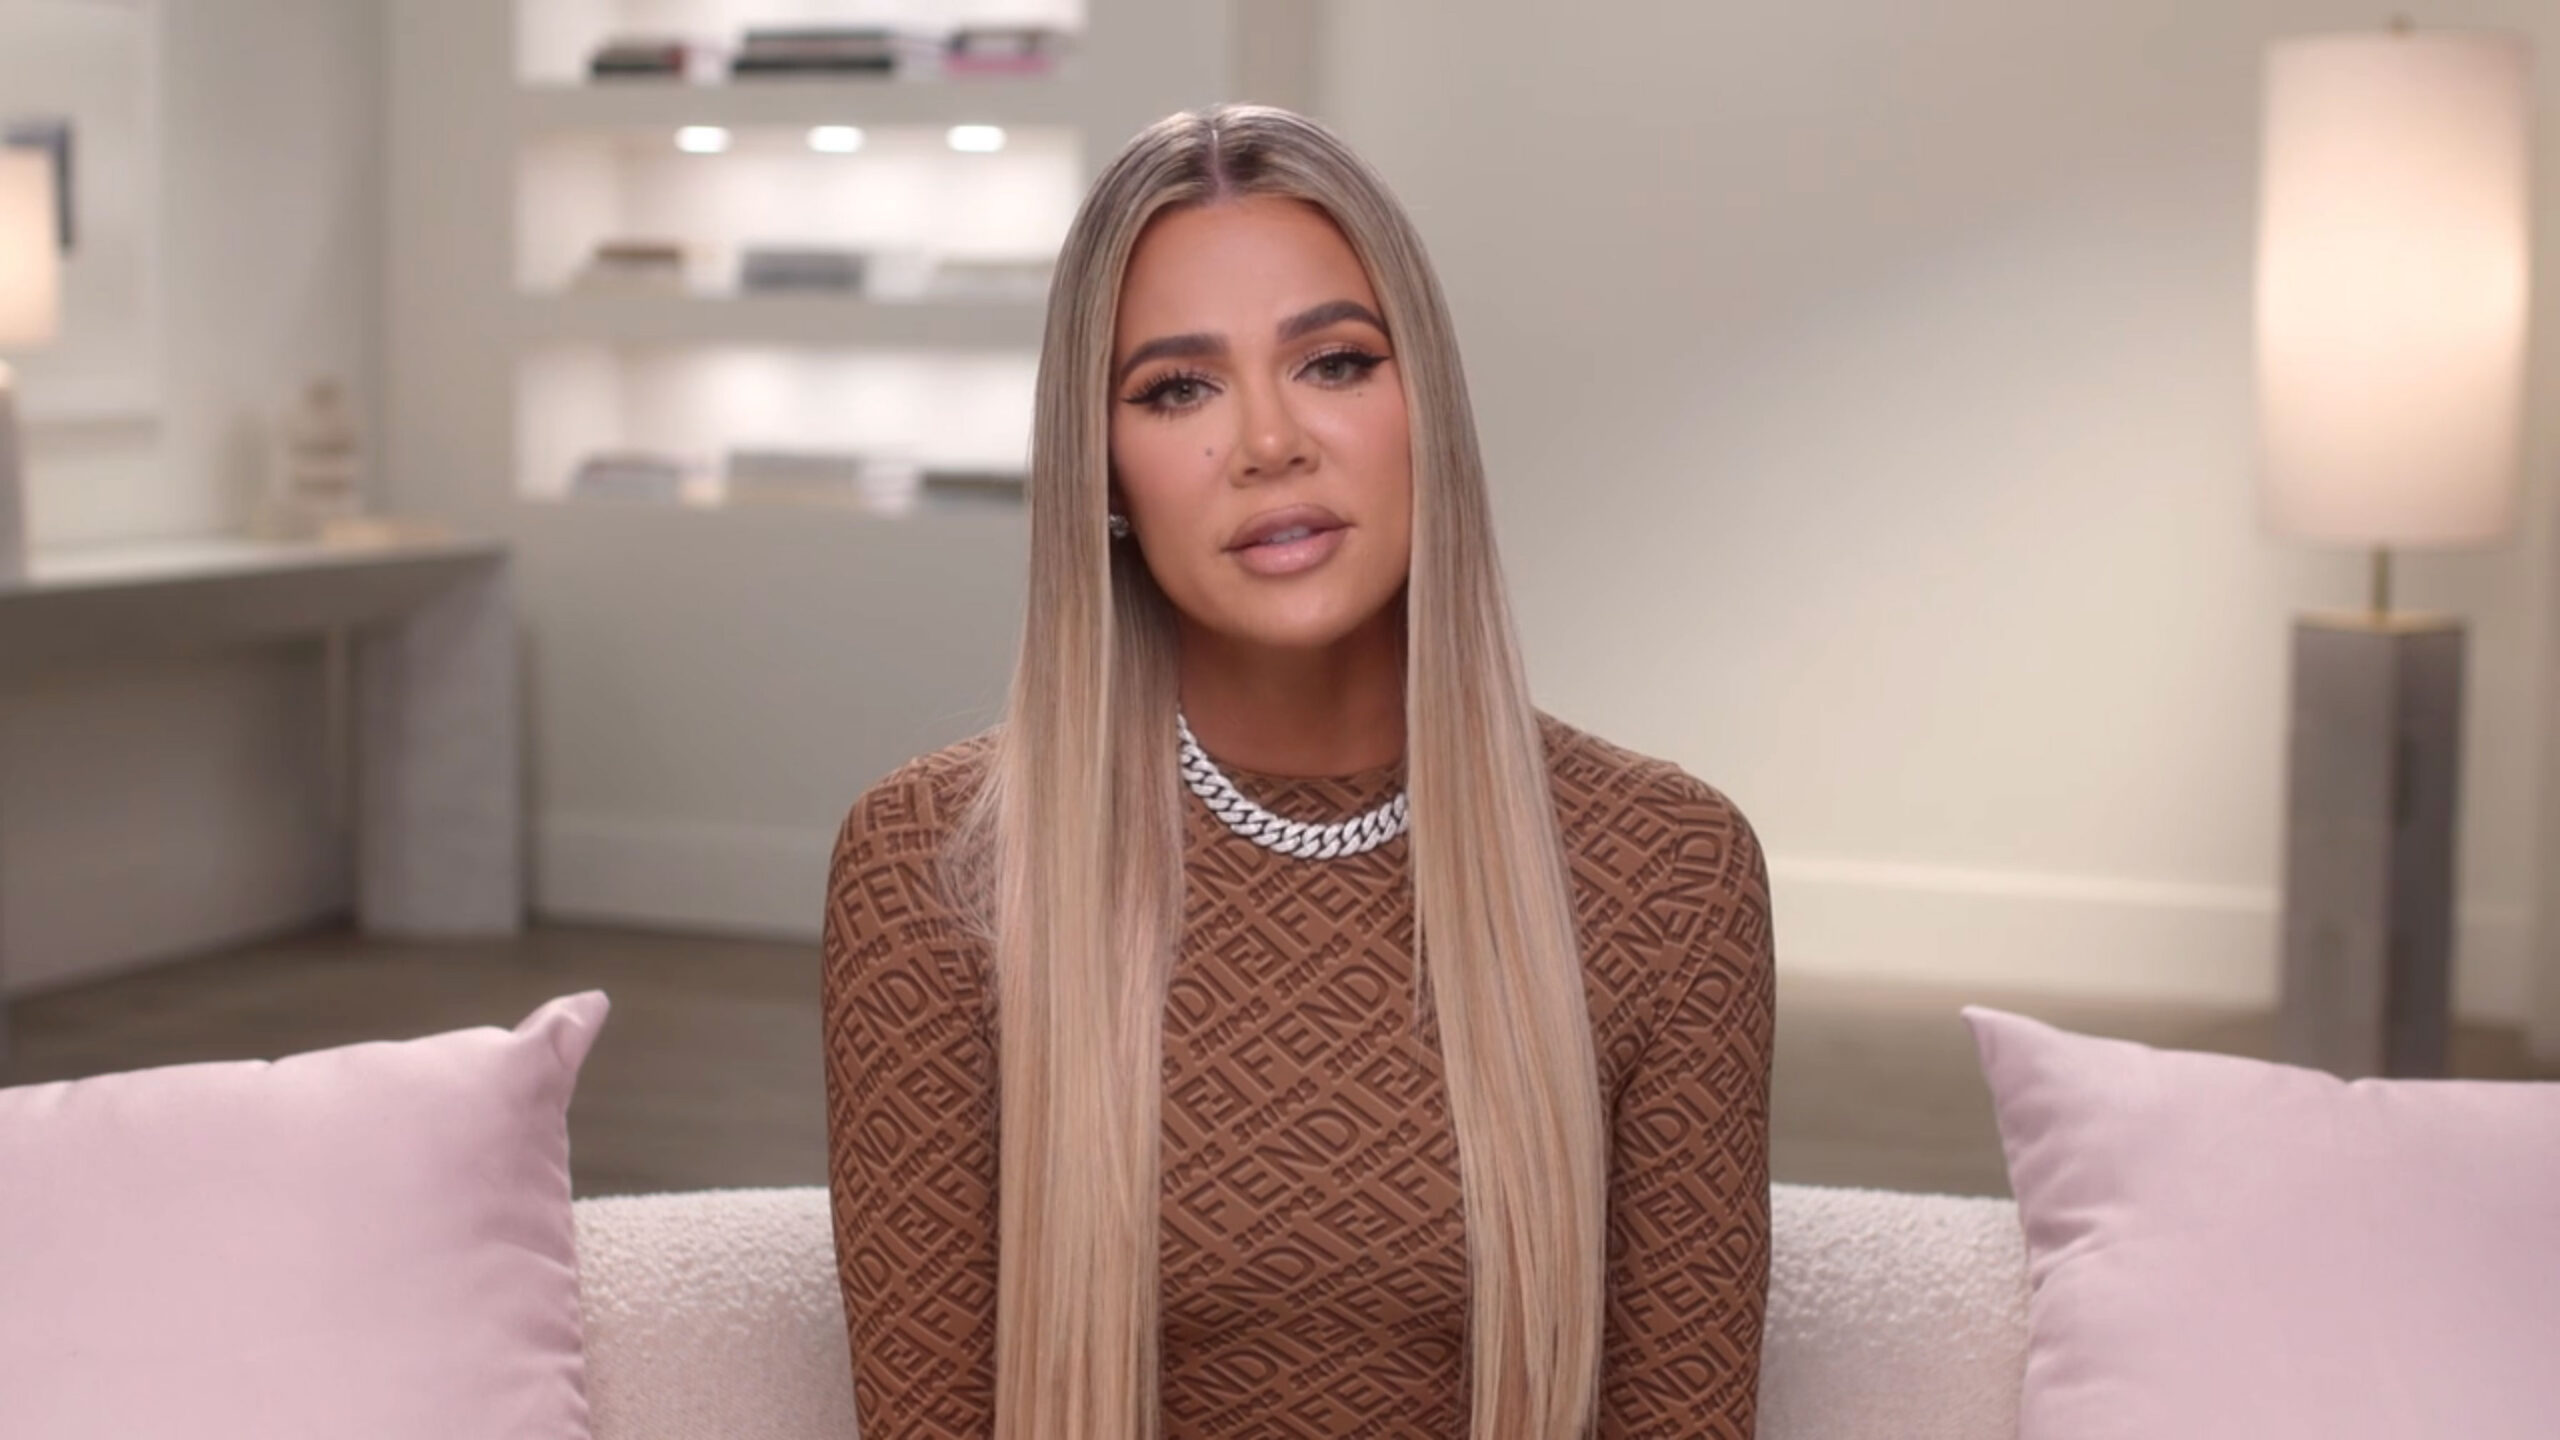 Fans slammed Khloe and accused her of 'blackfishing'